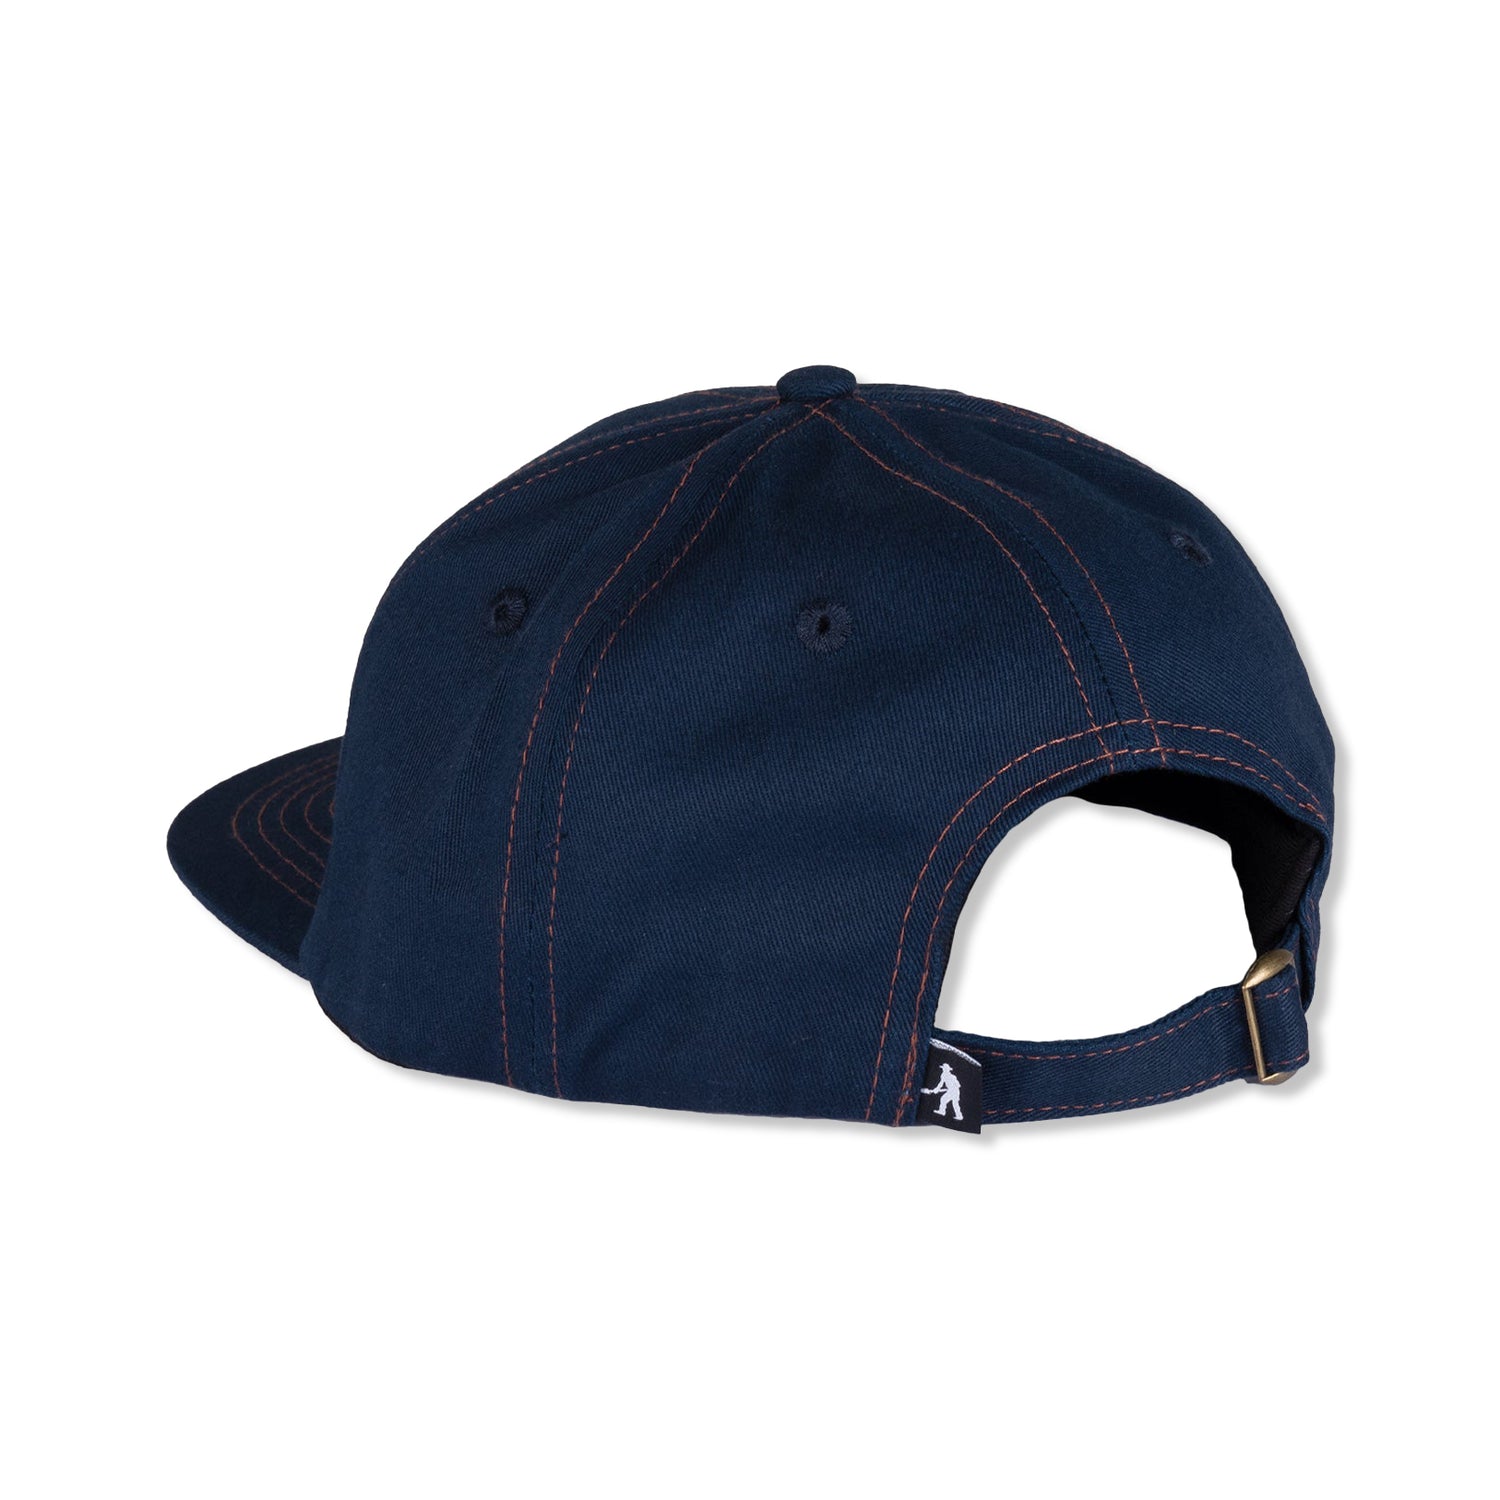 Pattoned Casual Hat, Navy